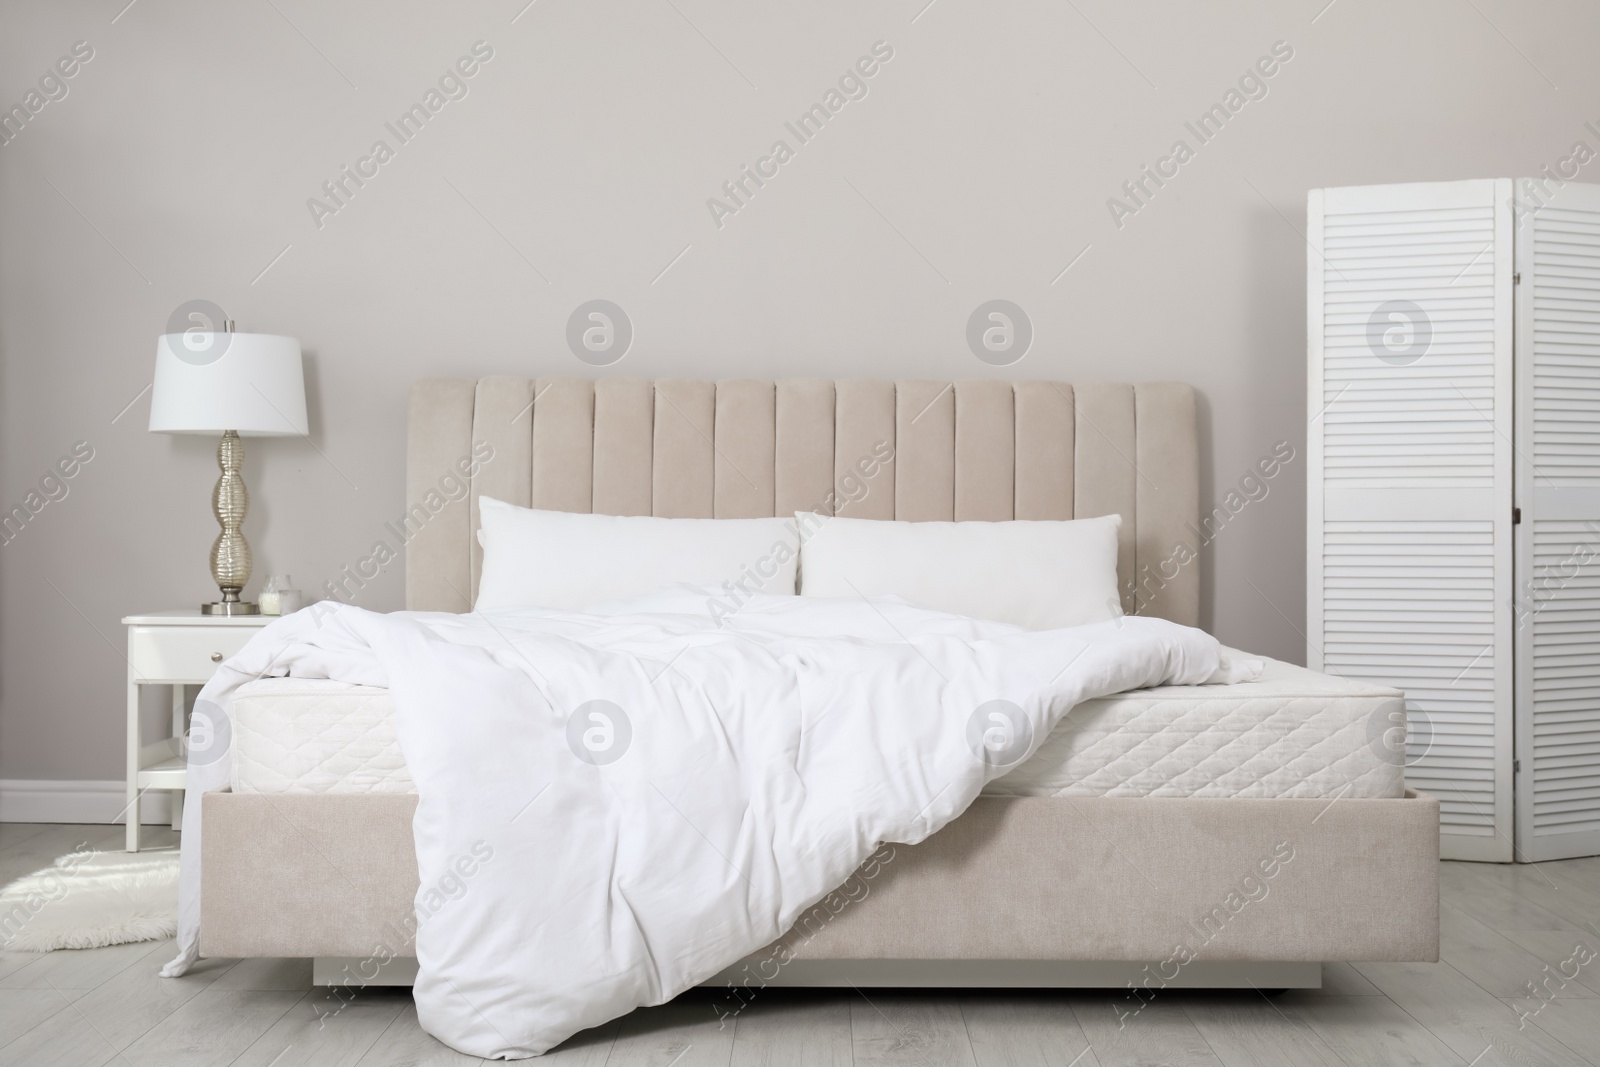 Photo of Comfortable bed with soft white mattress, blanket and pillows indoors